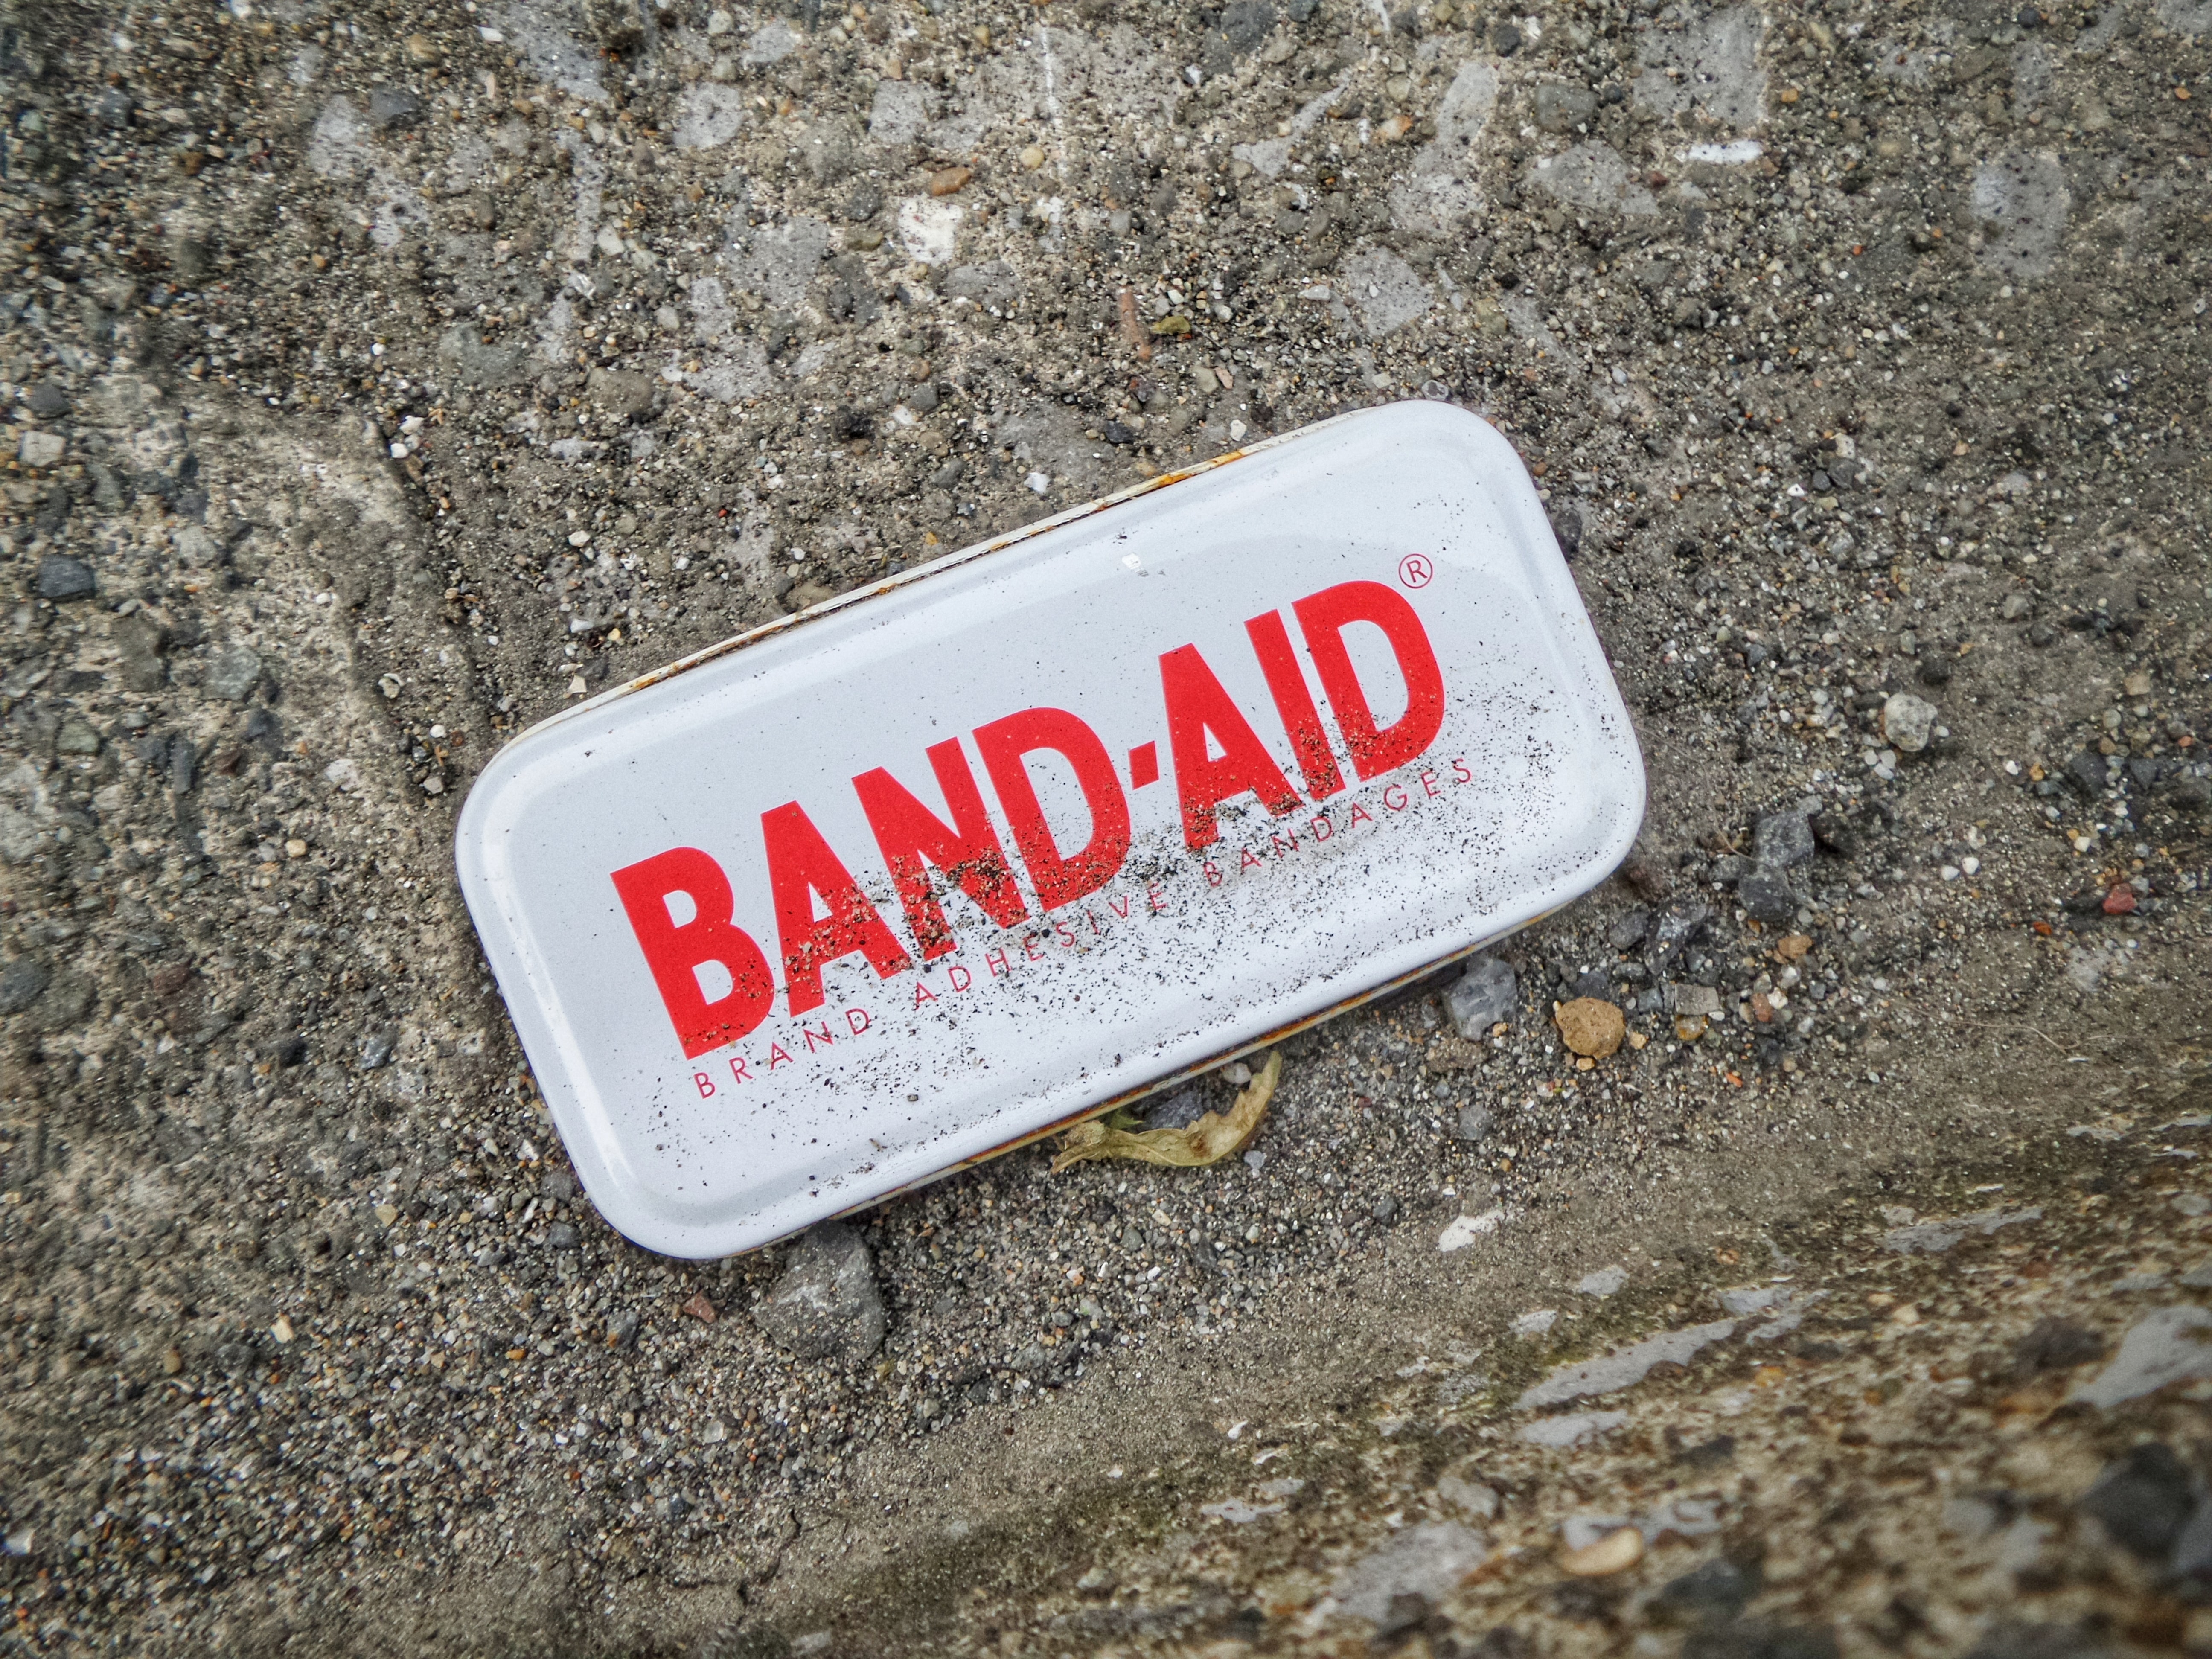 A Band-Aid package on the pavement.